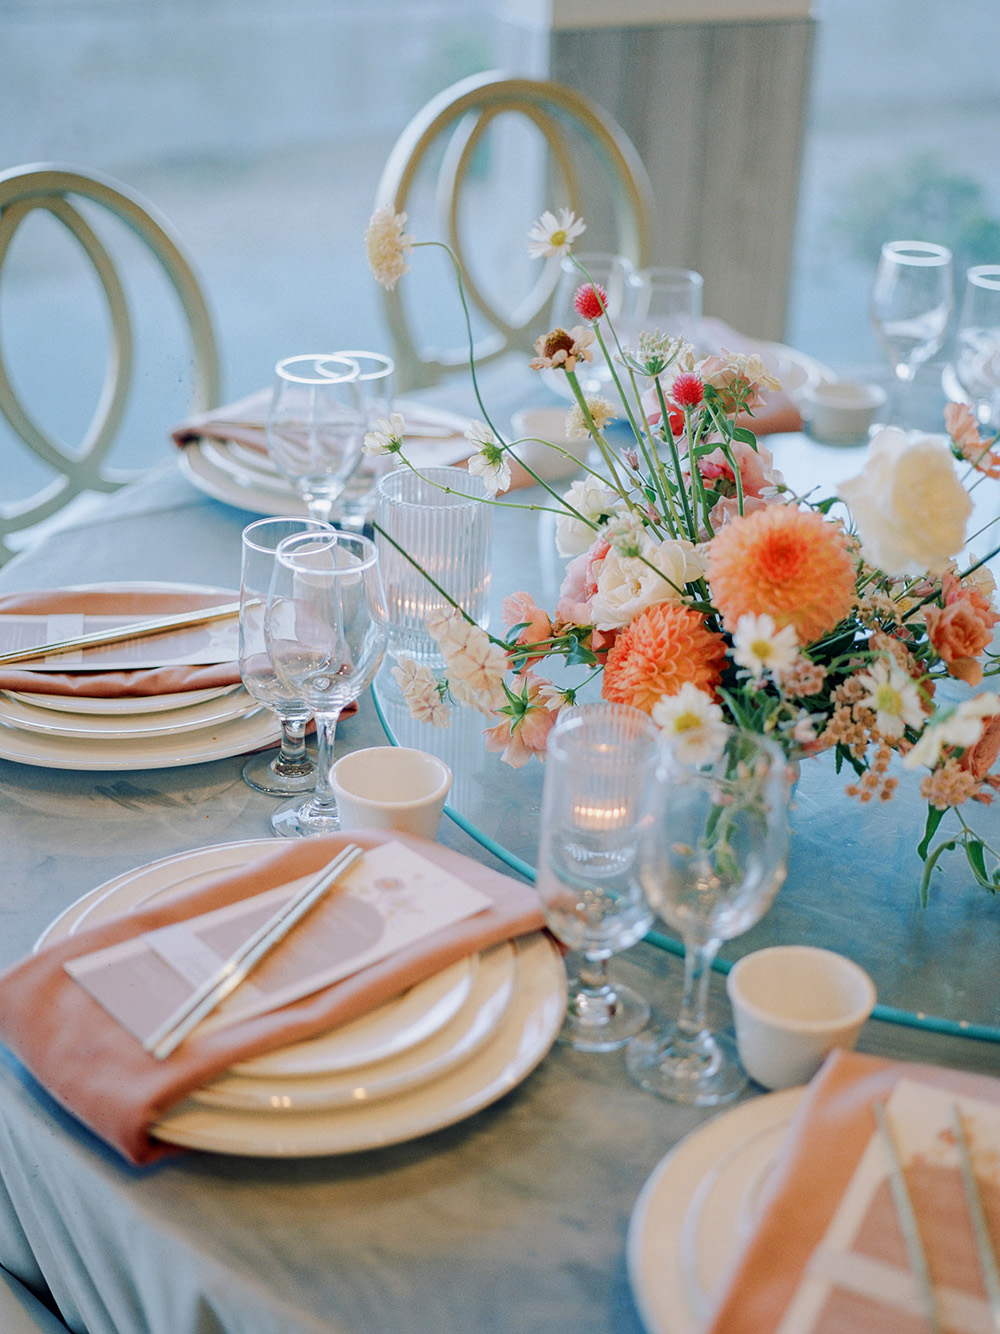 blush and white place settings for restaurant wedding reception